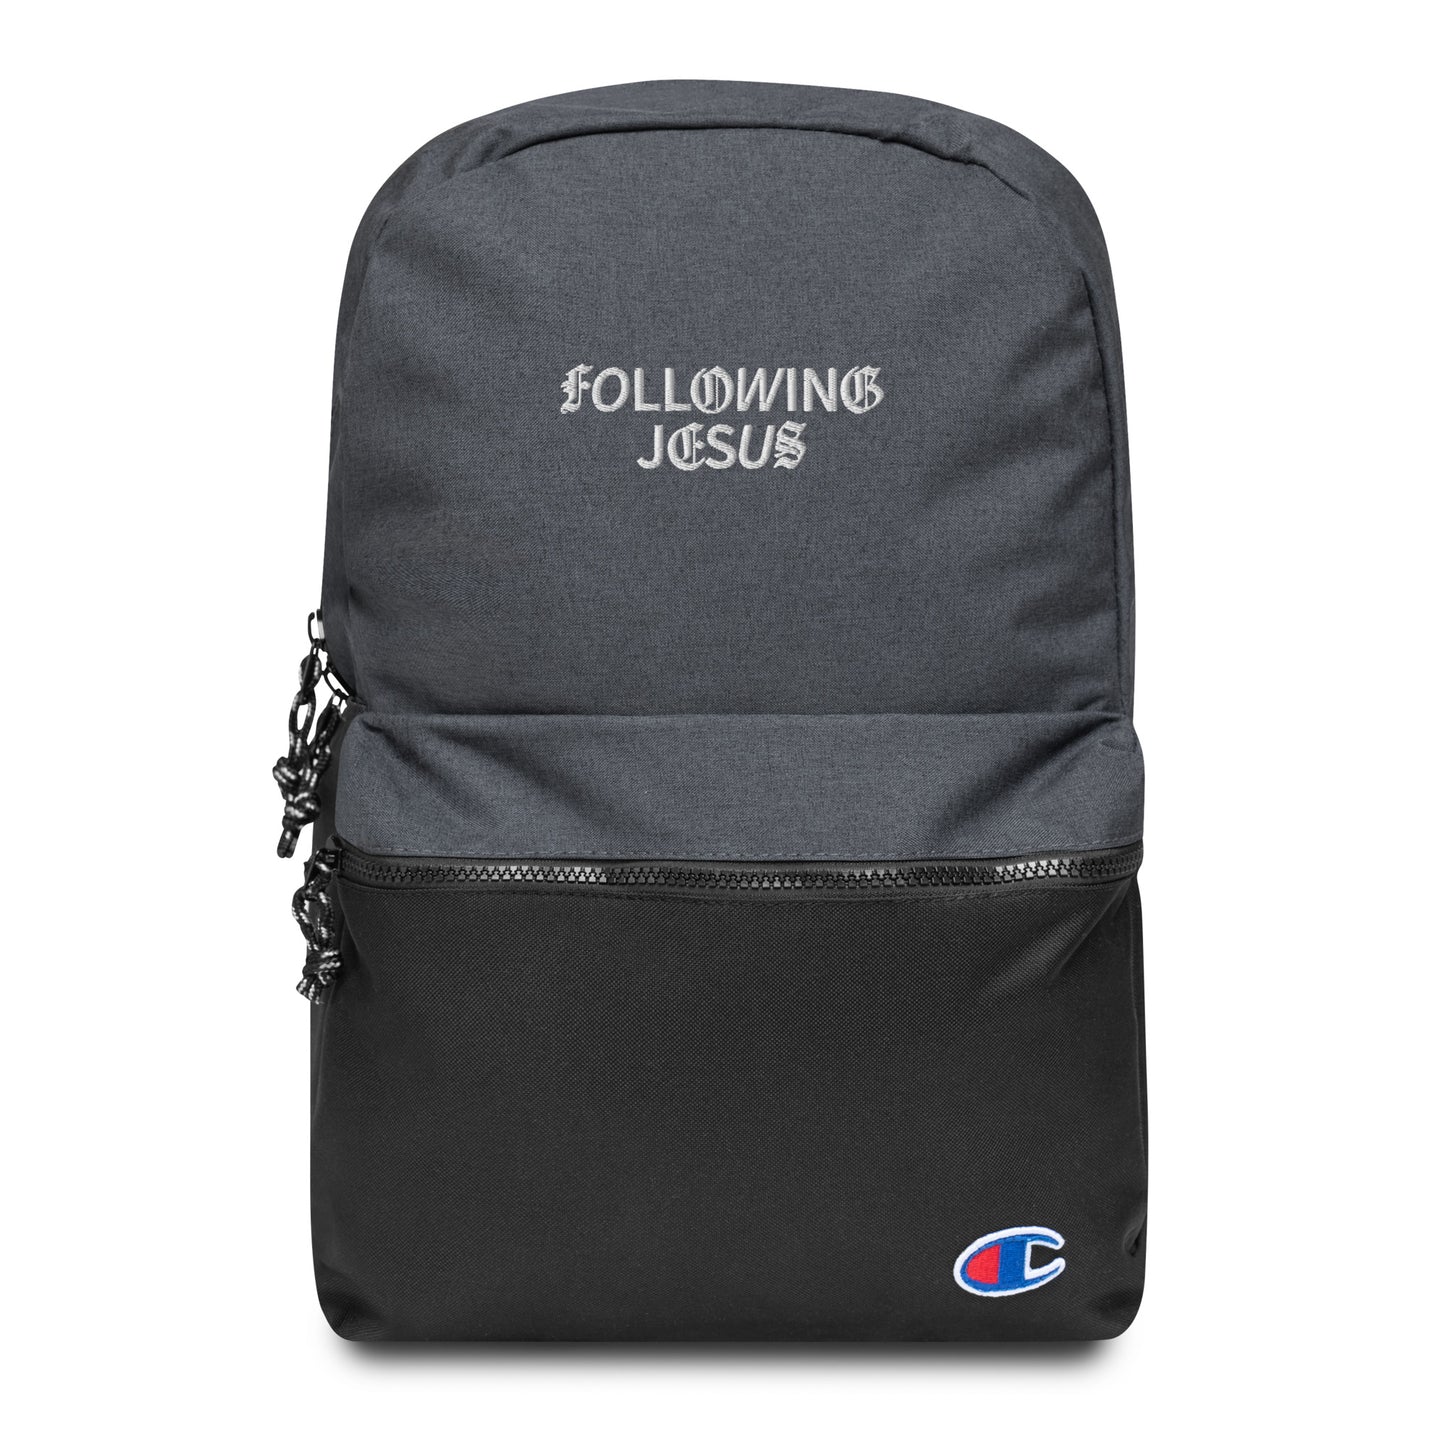 Following Jesus Champion Backpack